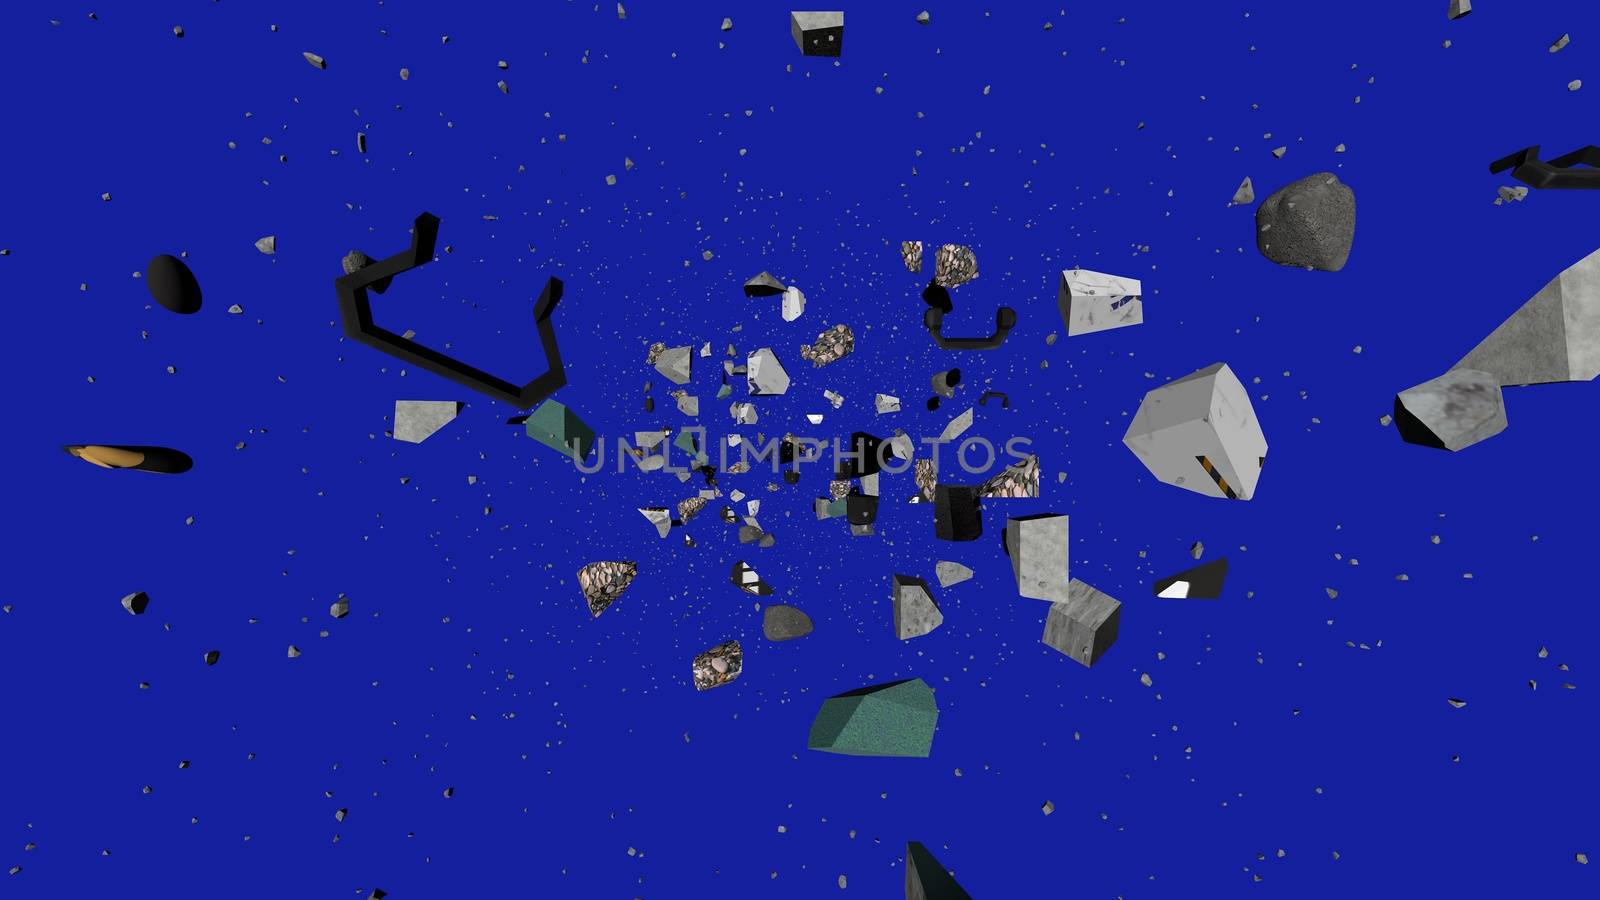 Striking 3d illustration of black and grey pebbles and wreckage tumbling towards shining stars in the dark blue universe. It looks inspiring and pioneering.